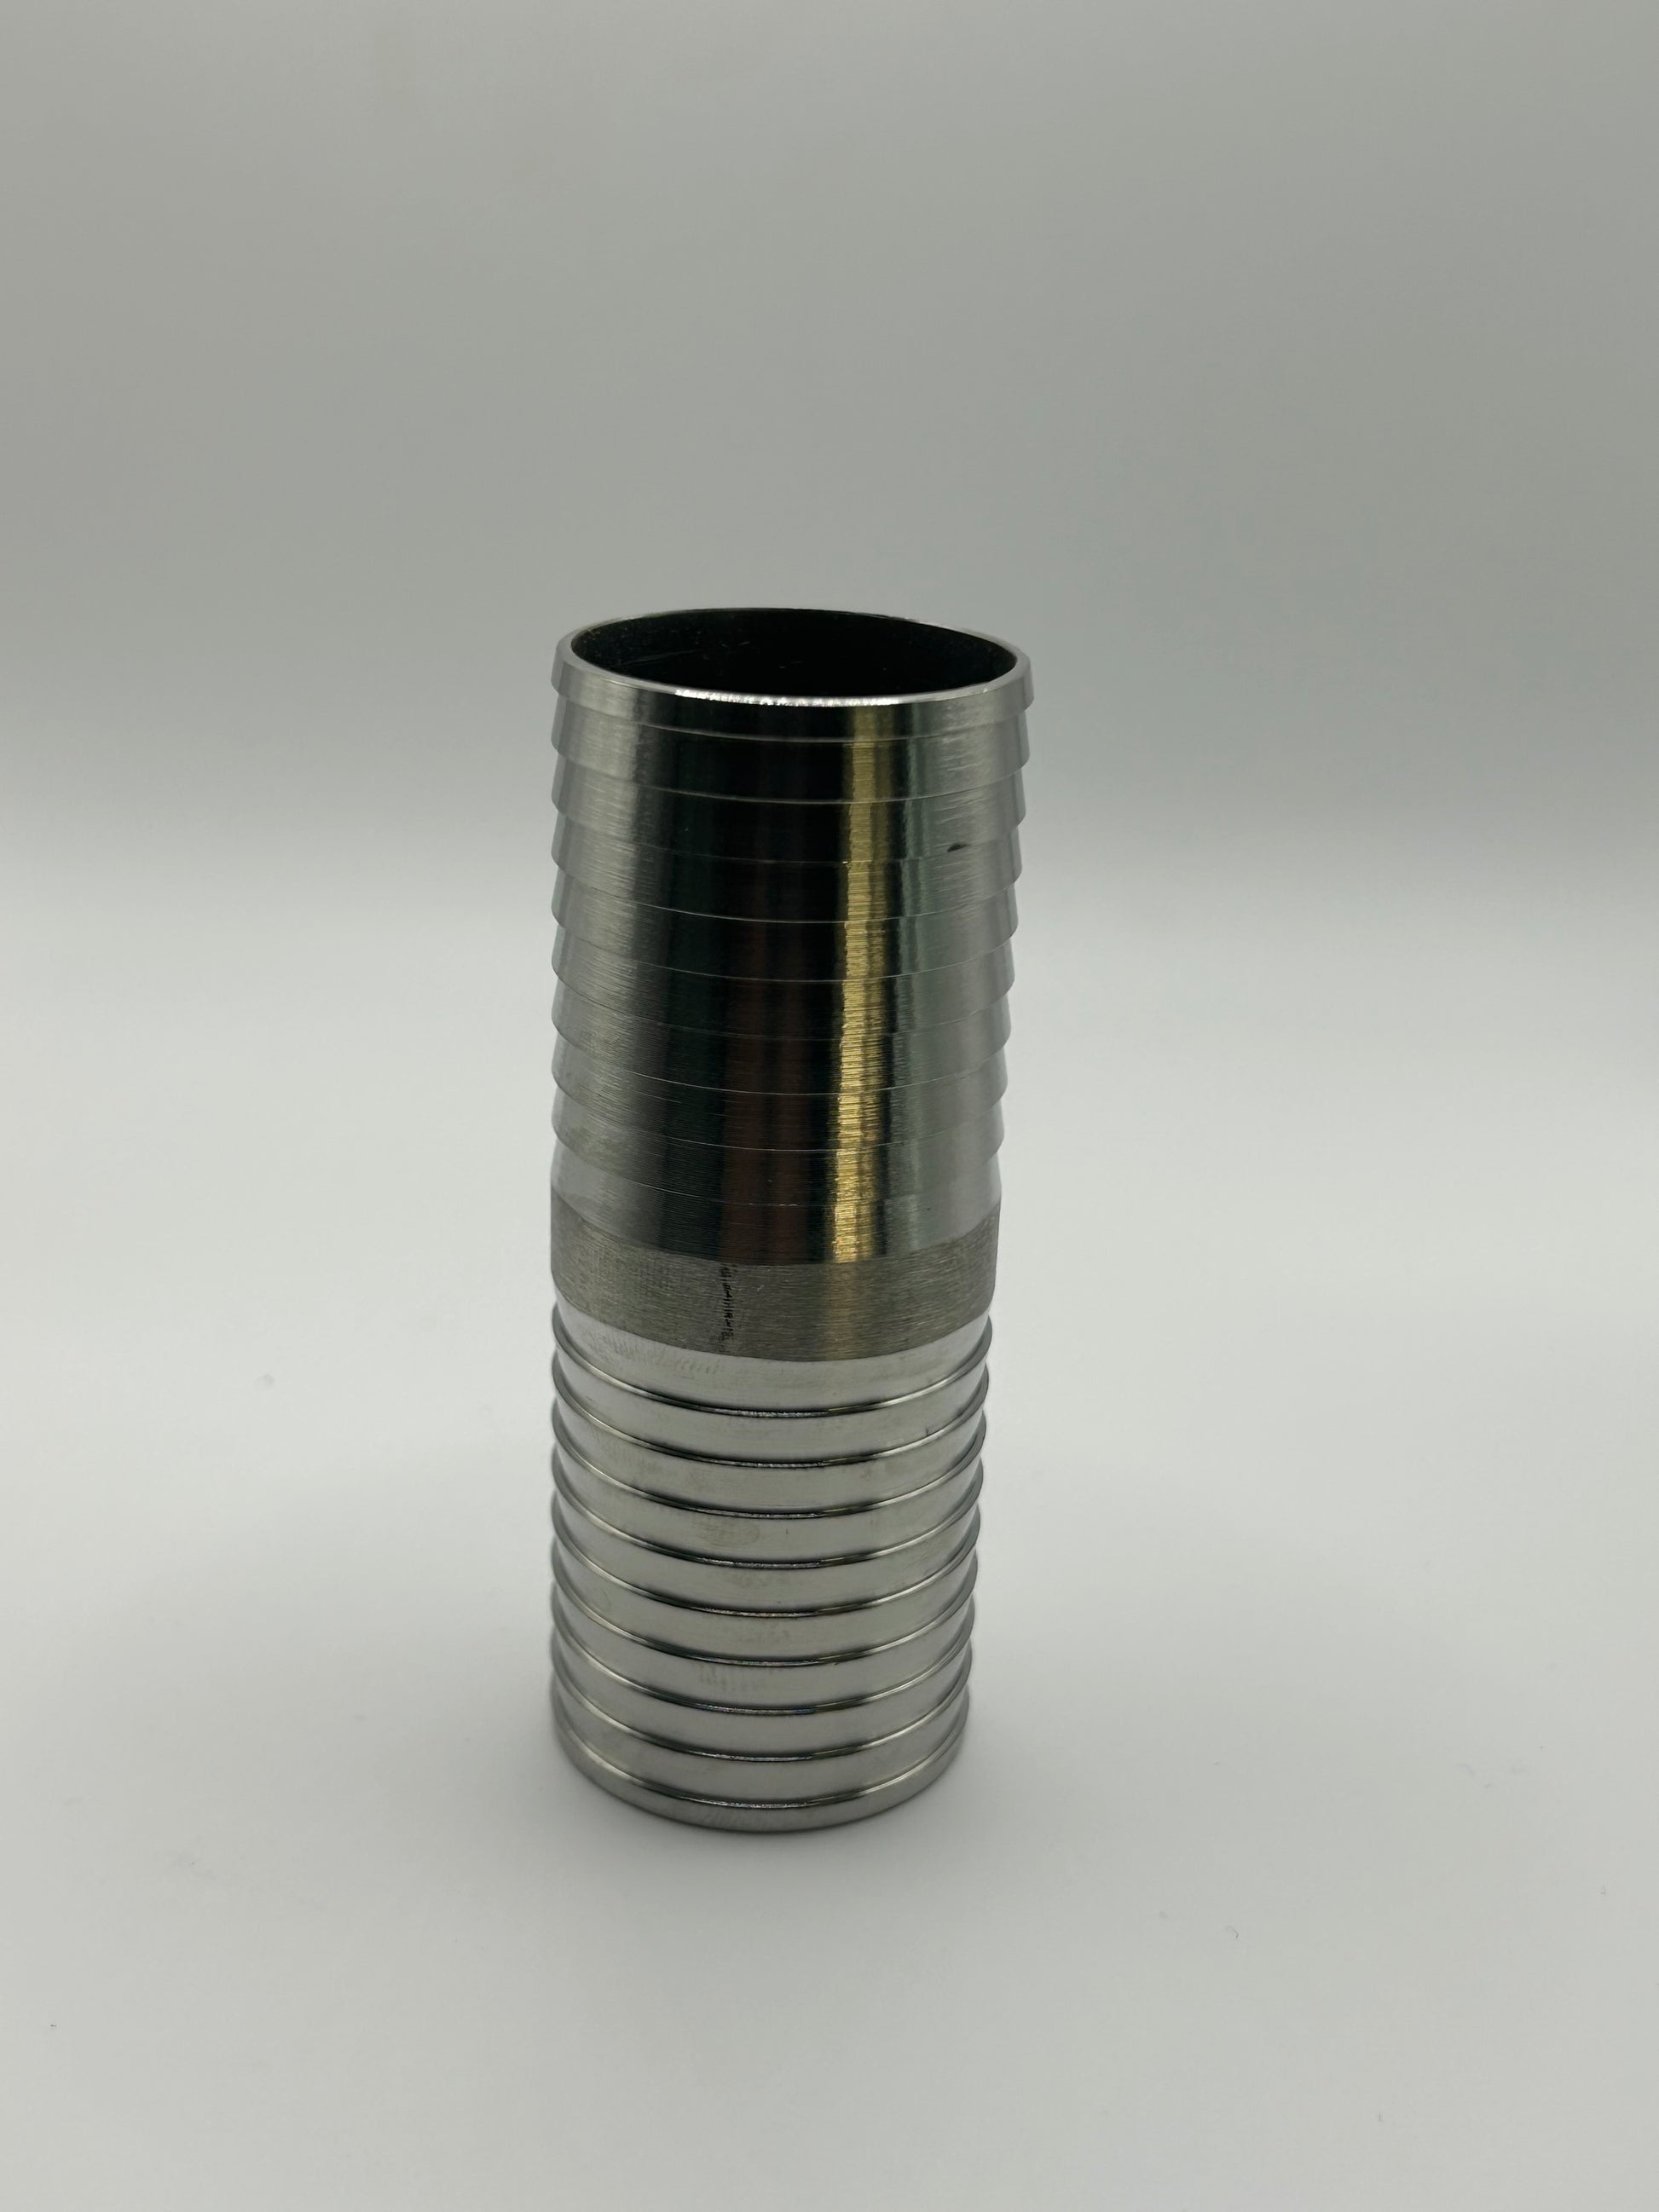 304 Stainless Steel, 1 1/2 in x 1 1/2 in Fitting Pipe Size, Union -  1LUF8